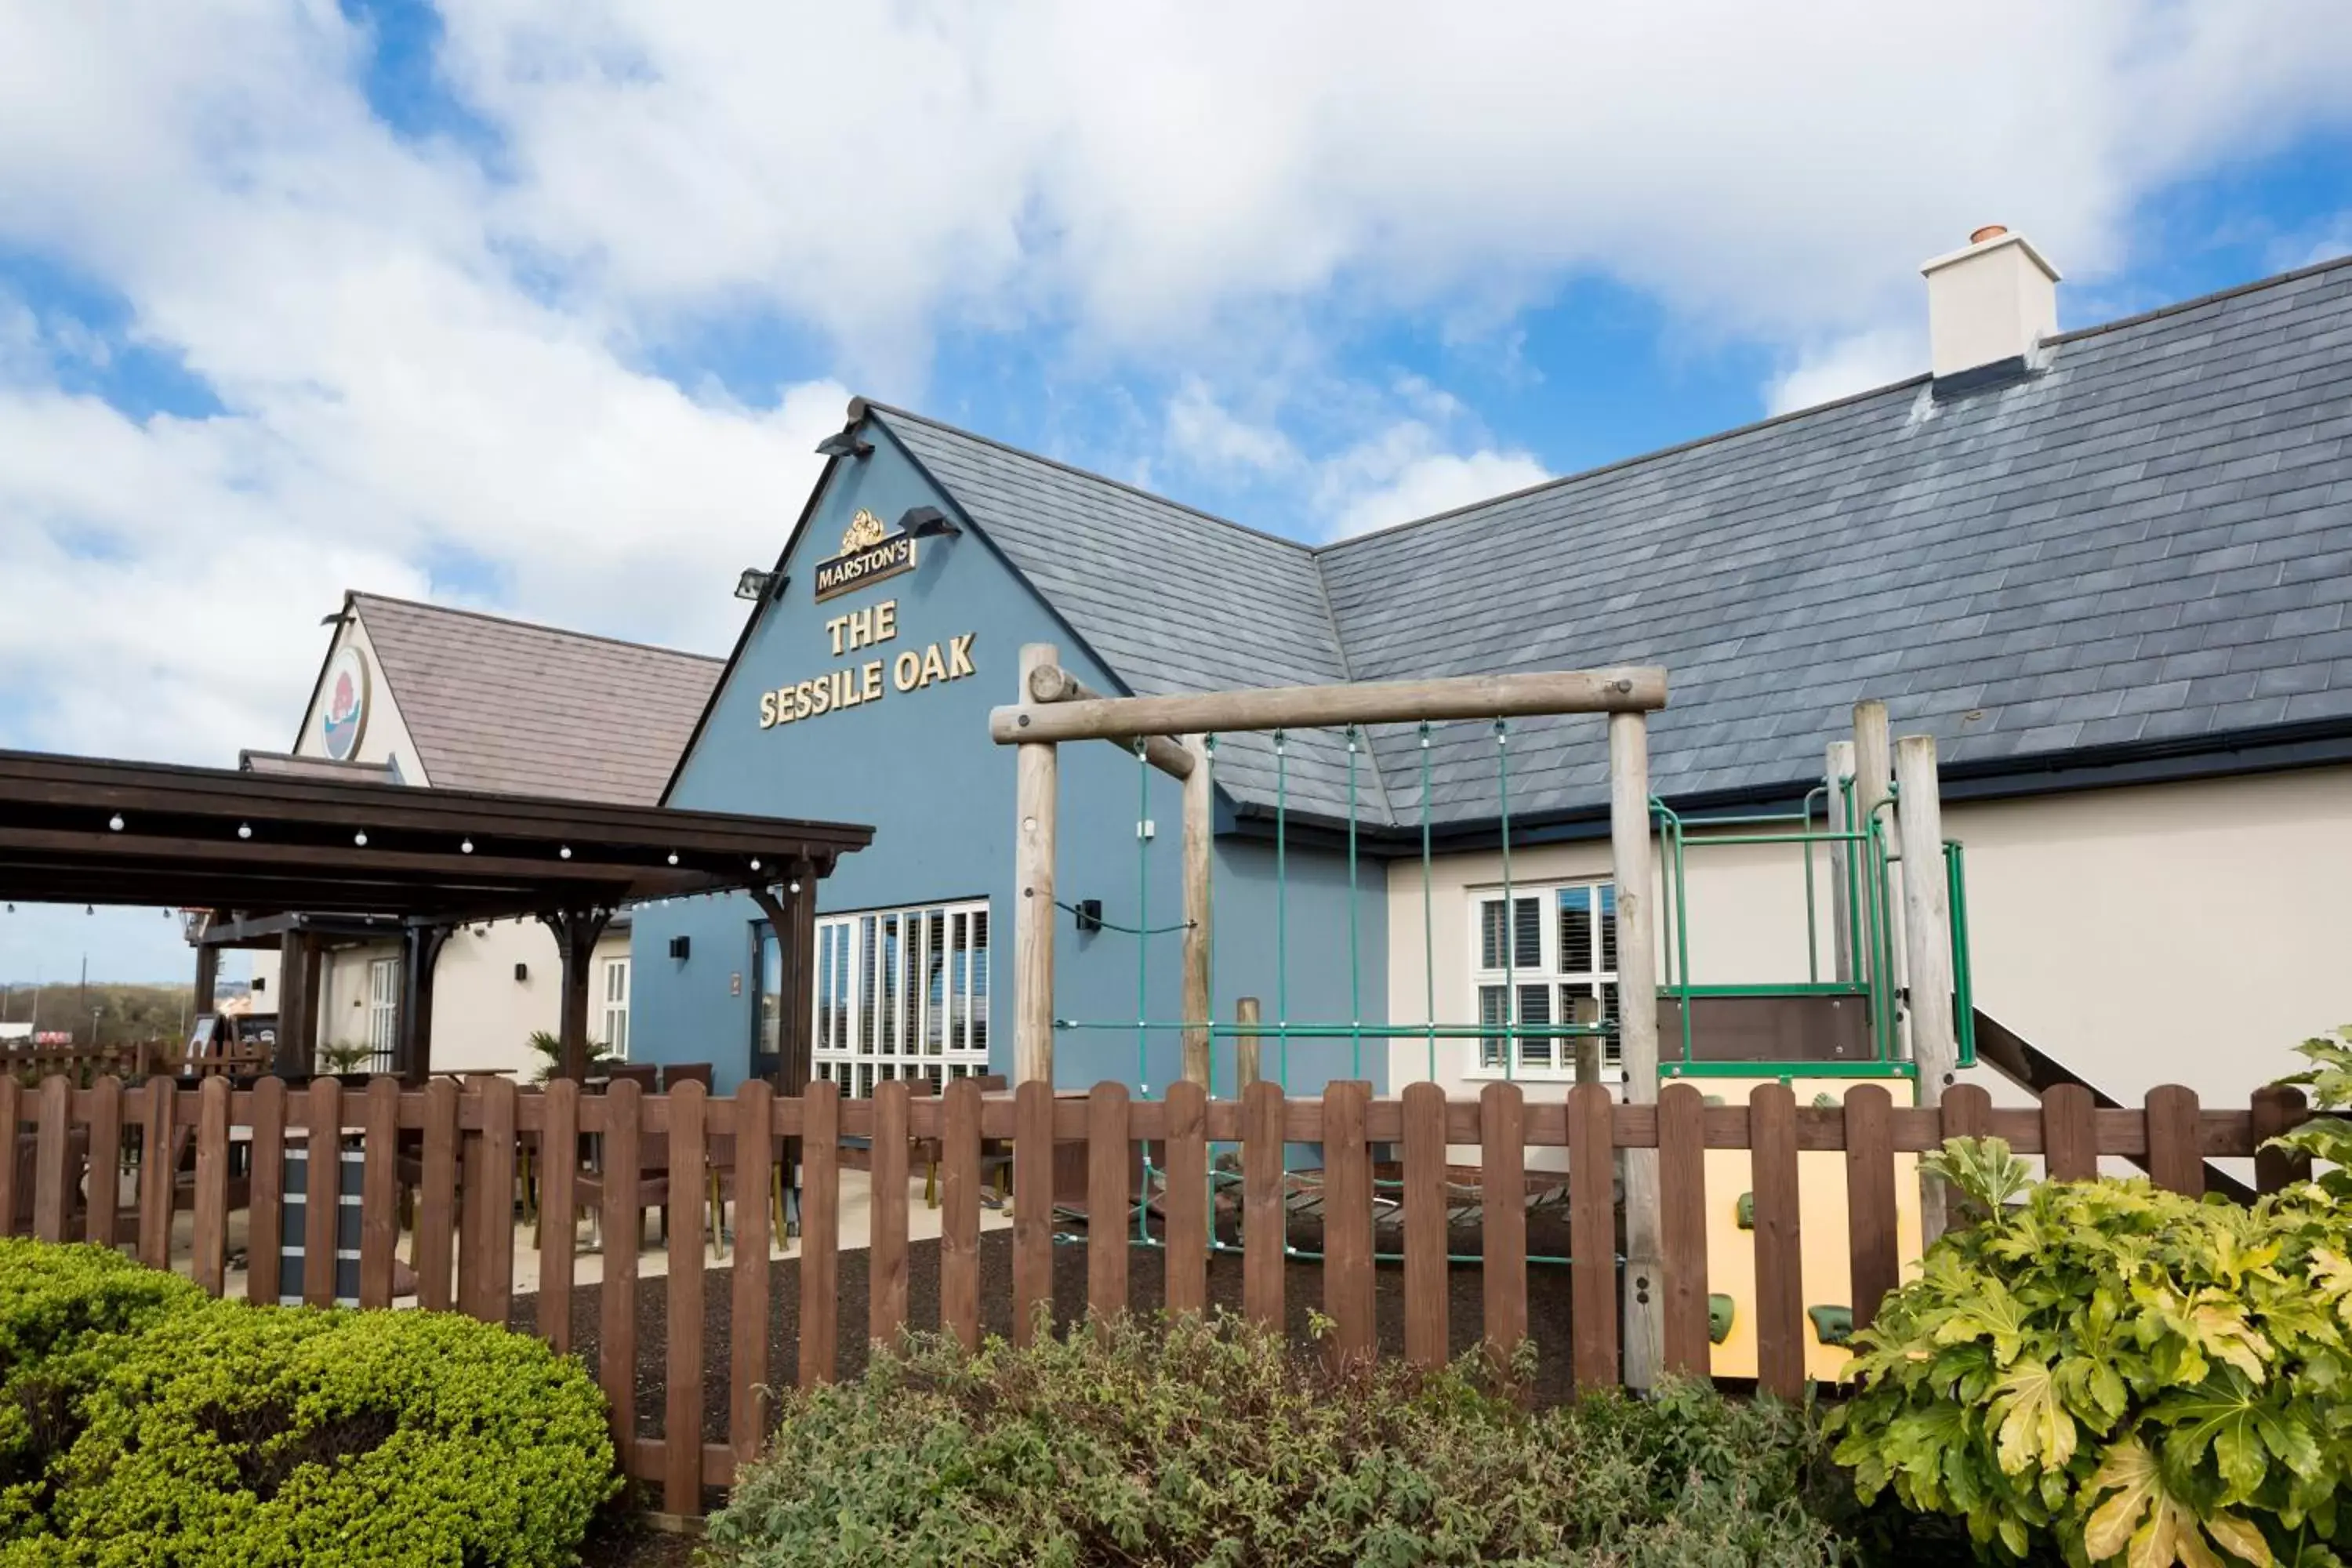 Property Building in Sessile Oak, Llanelli by Marston's Inns